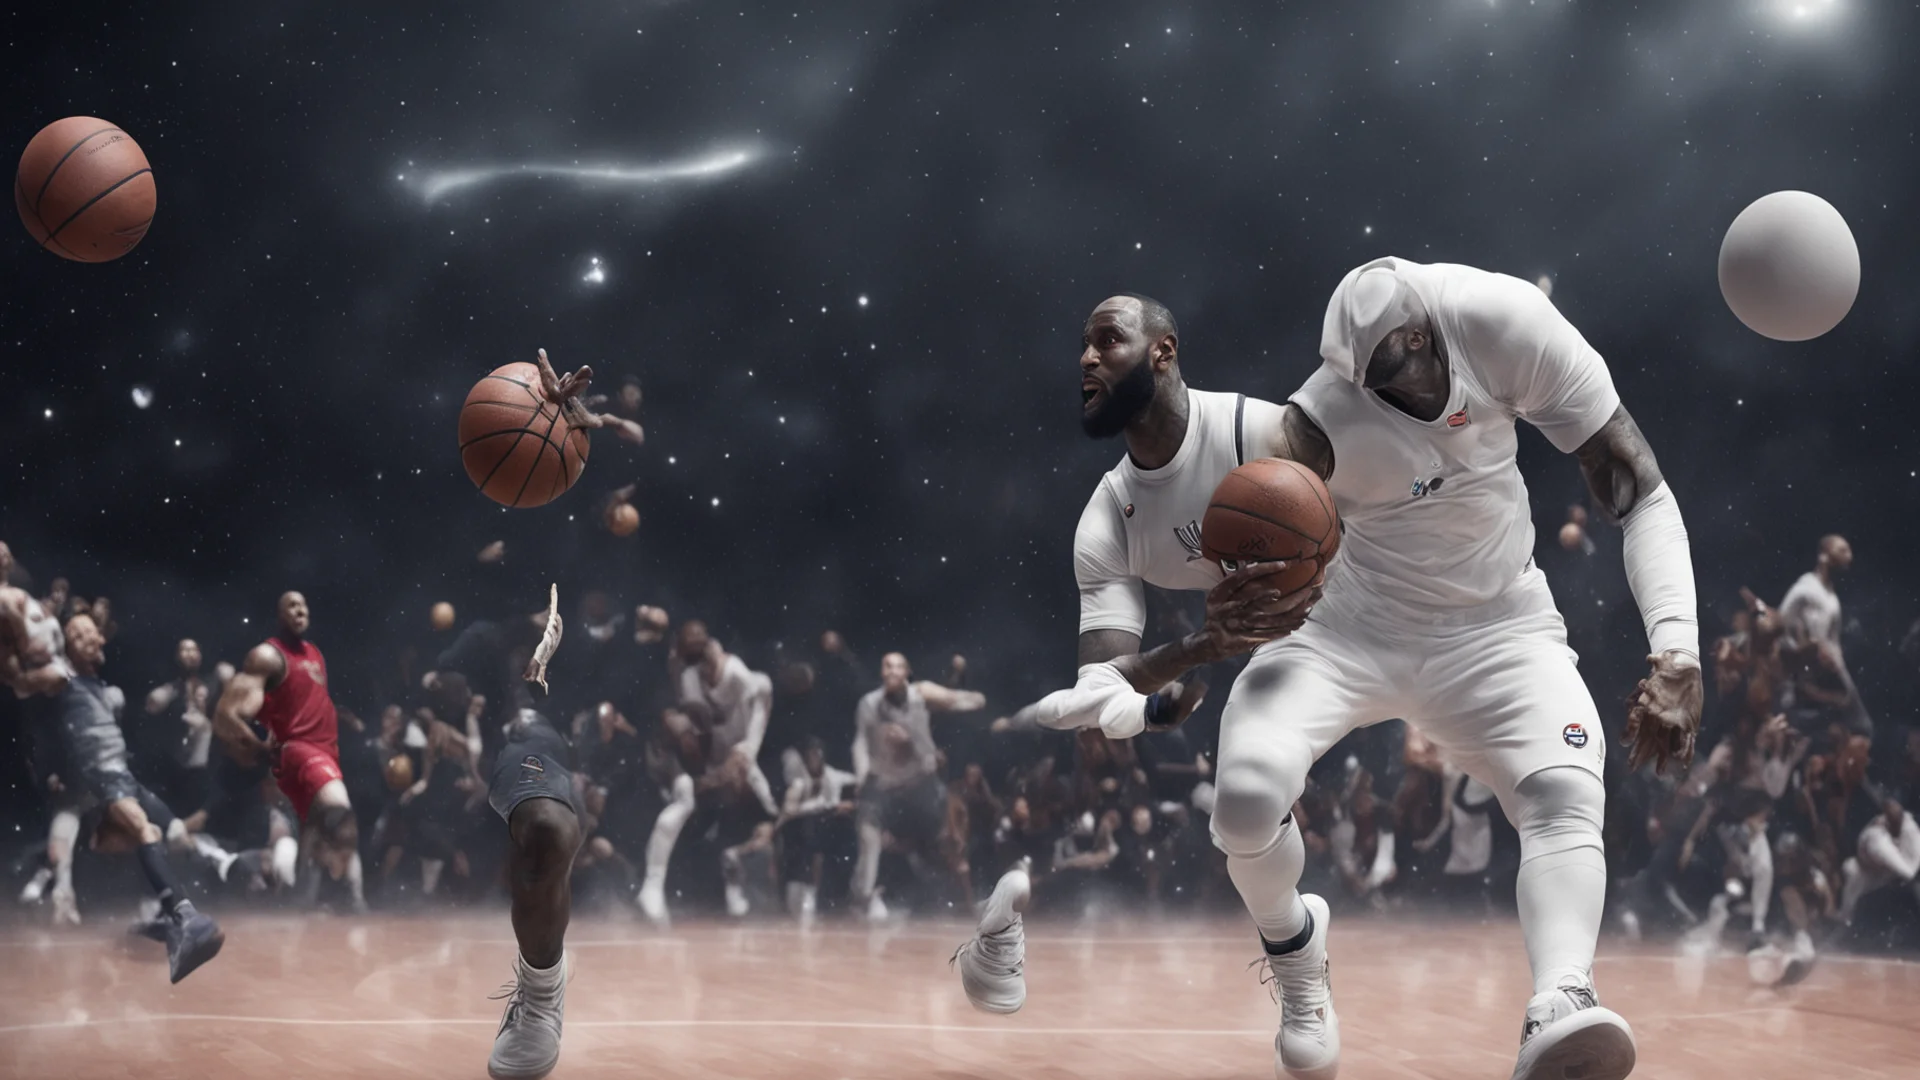 ailebron james into the space playing basketball with aliens  confident engaging wow artstation art 3 wide